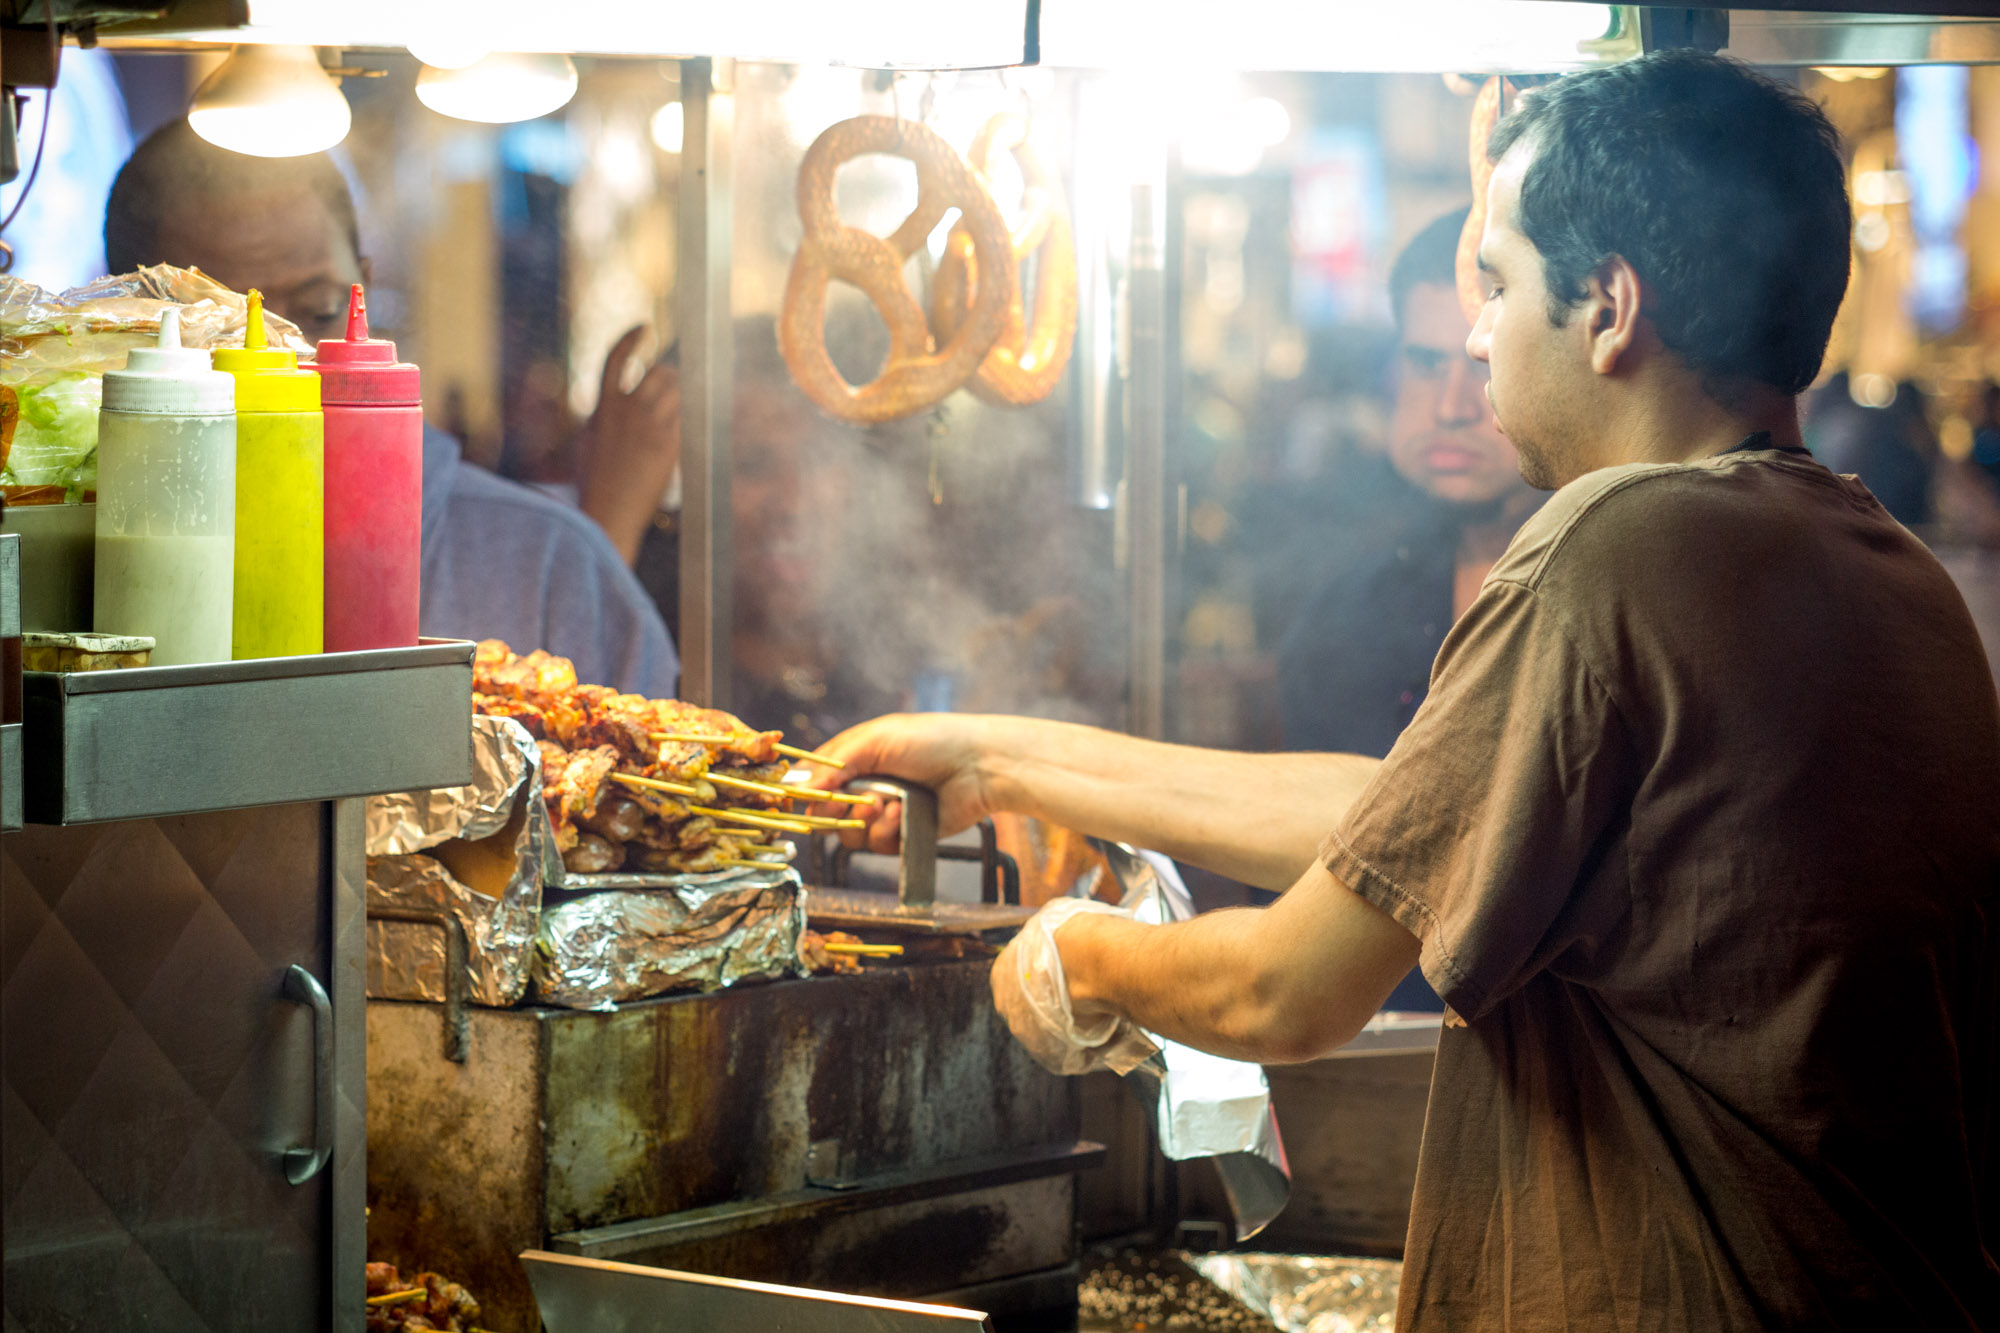 A chef makes food at a food cart in NYC